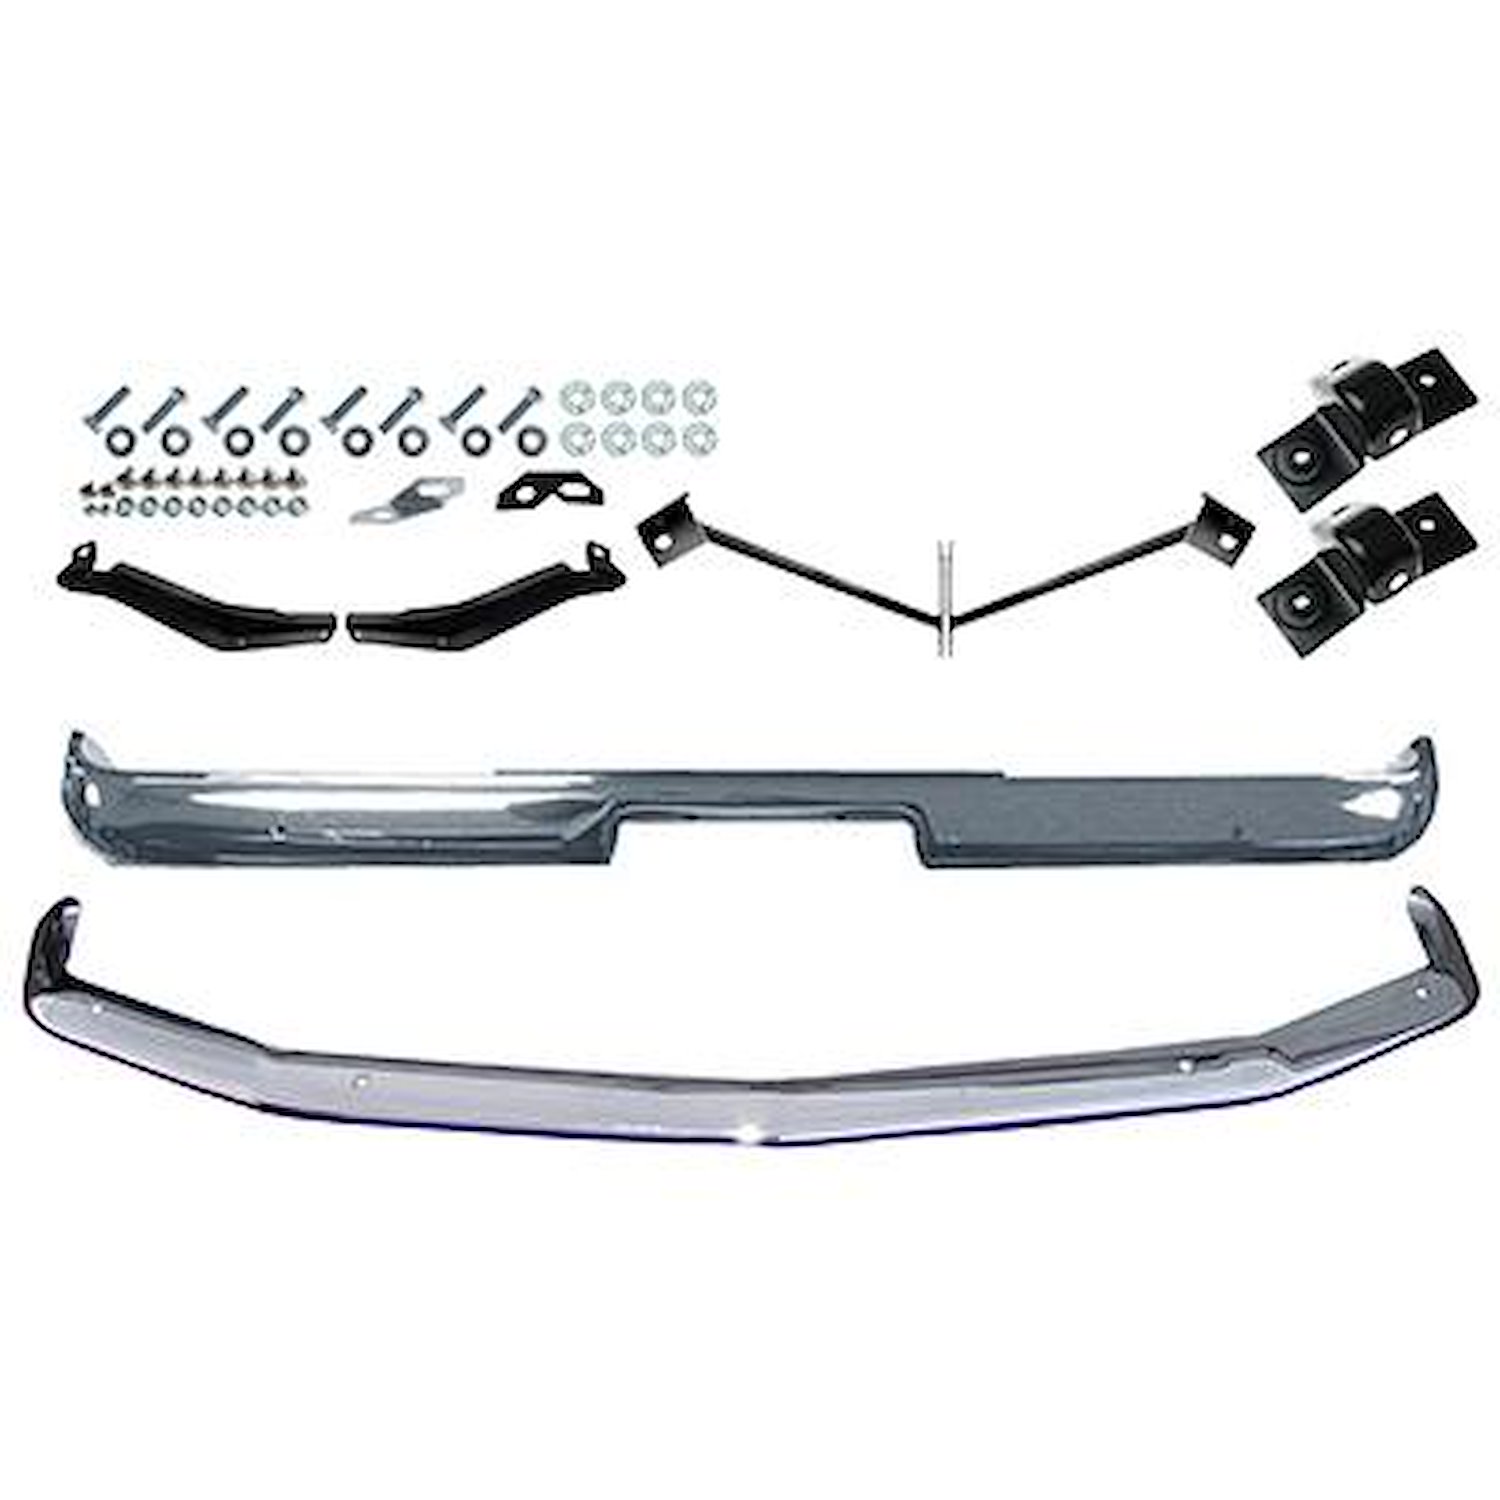 BBK2 Front and Rear Bumper Kit 1967-68 Mustang With Brackets and Hardware